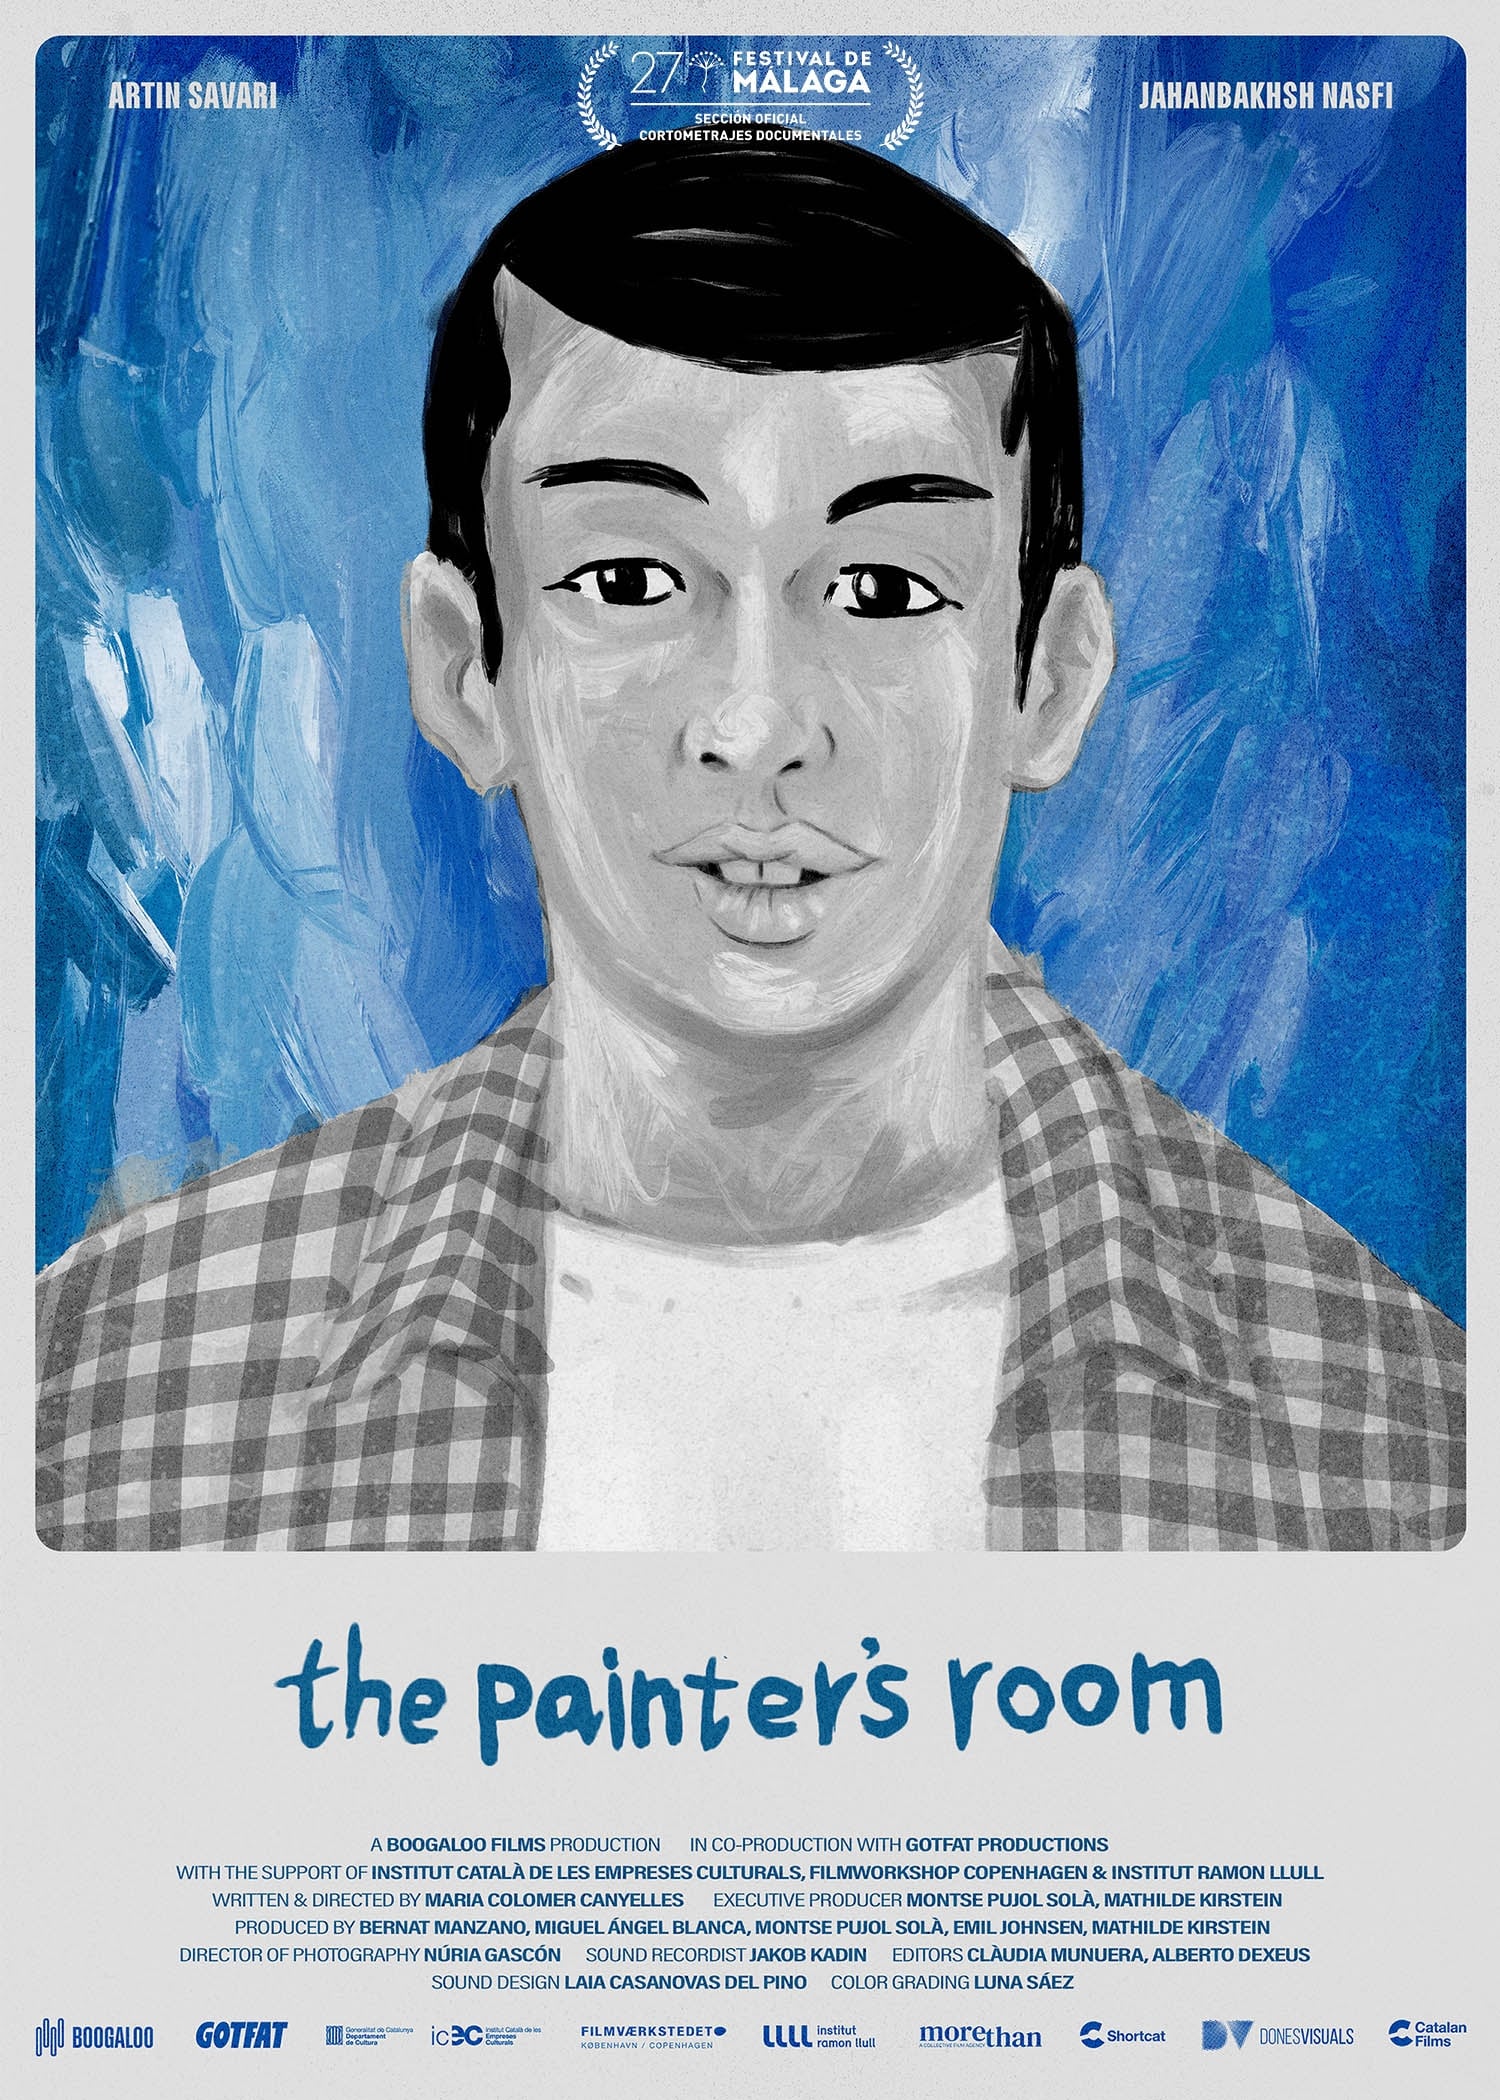 The Painter's Room